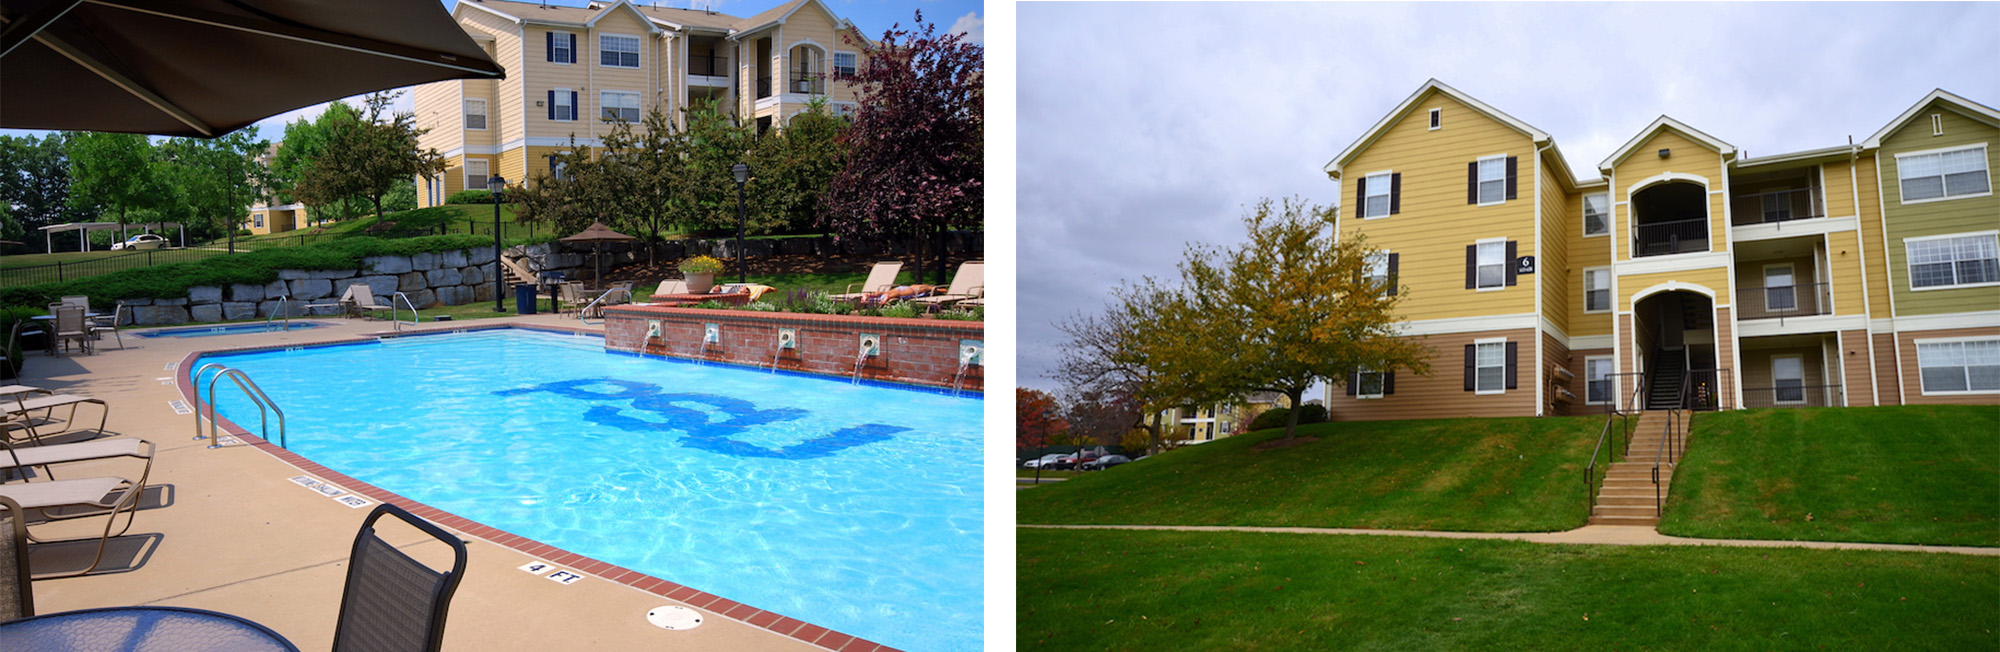 Pool and exterior of Penn State student housing communities